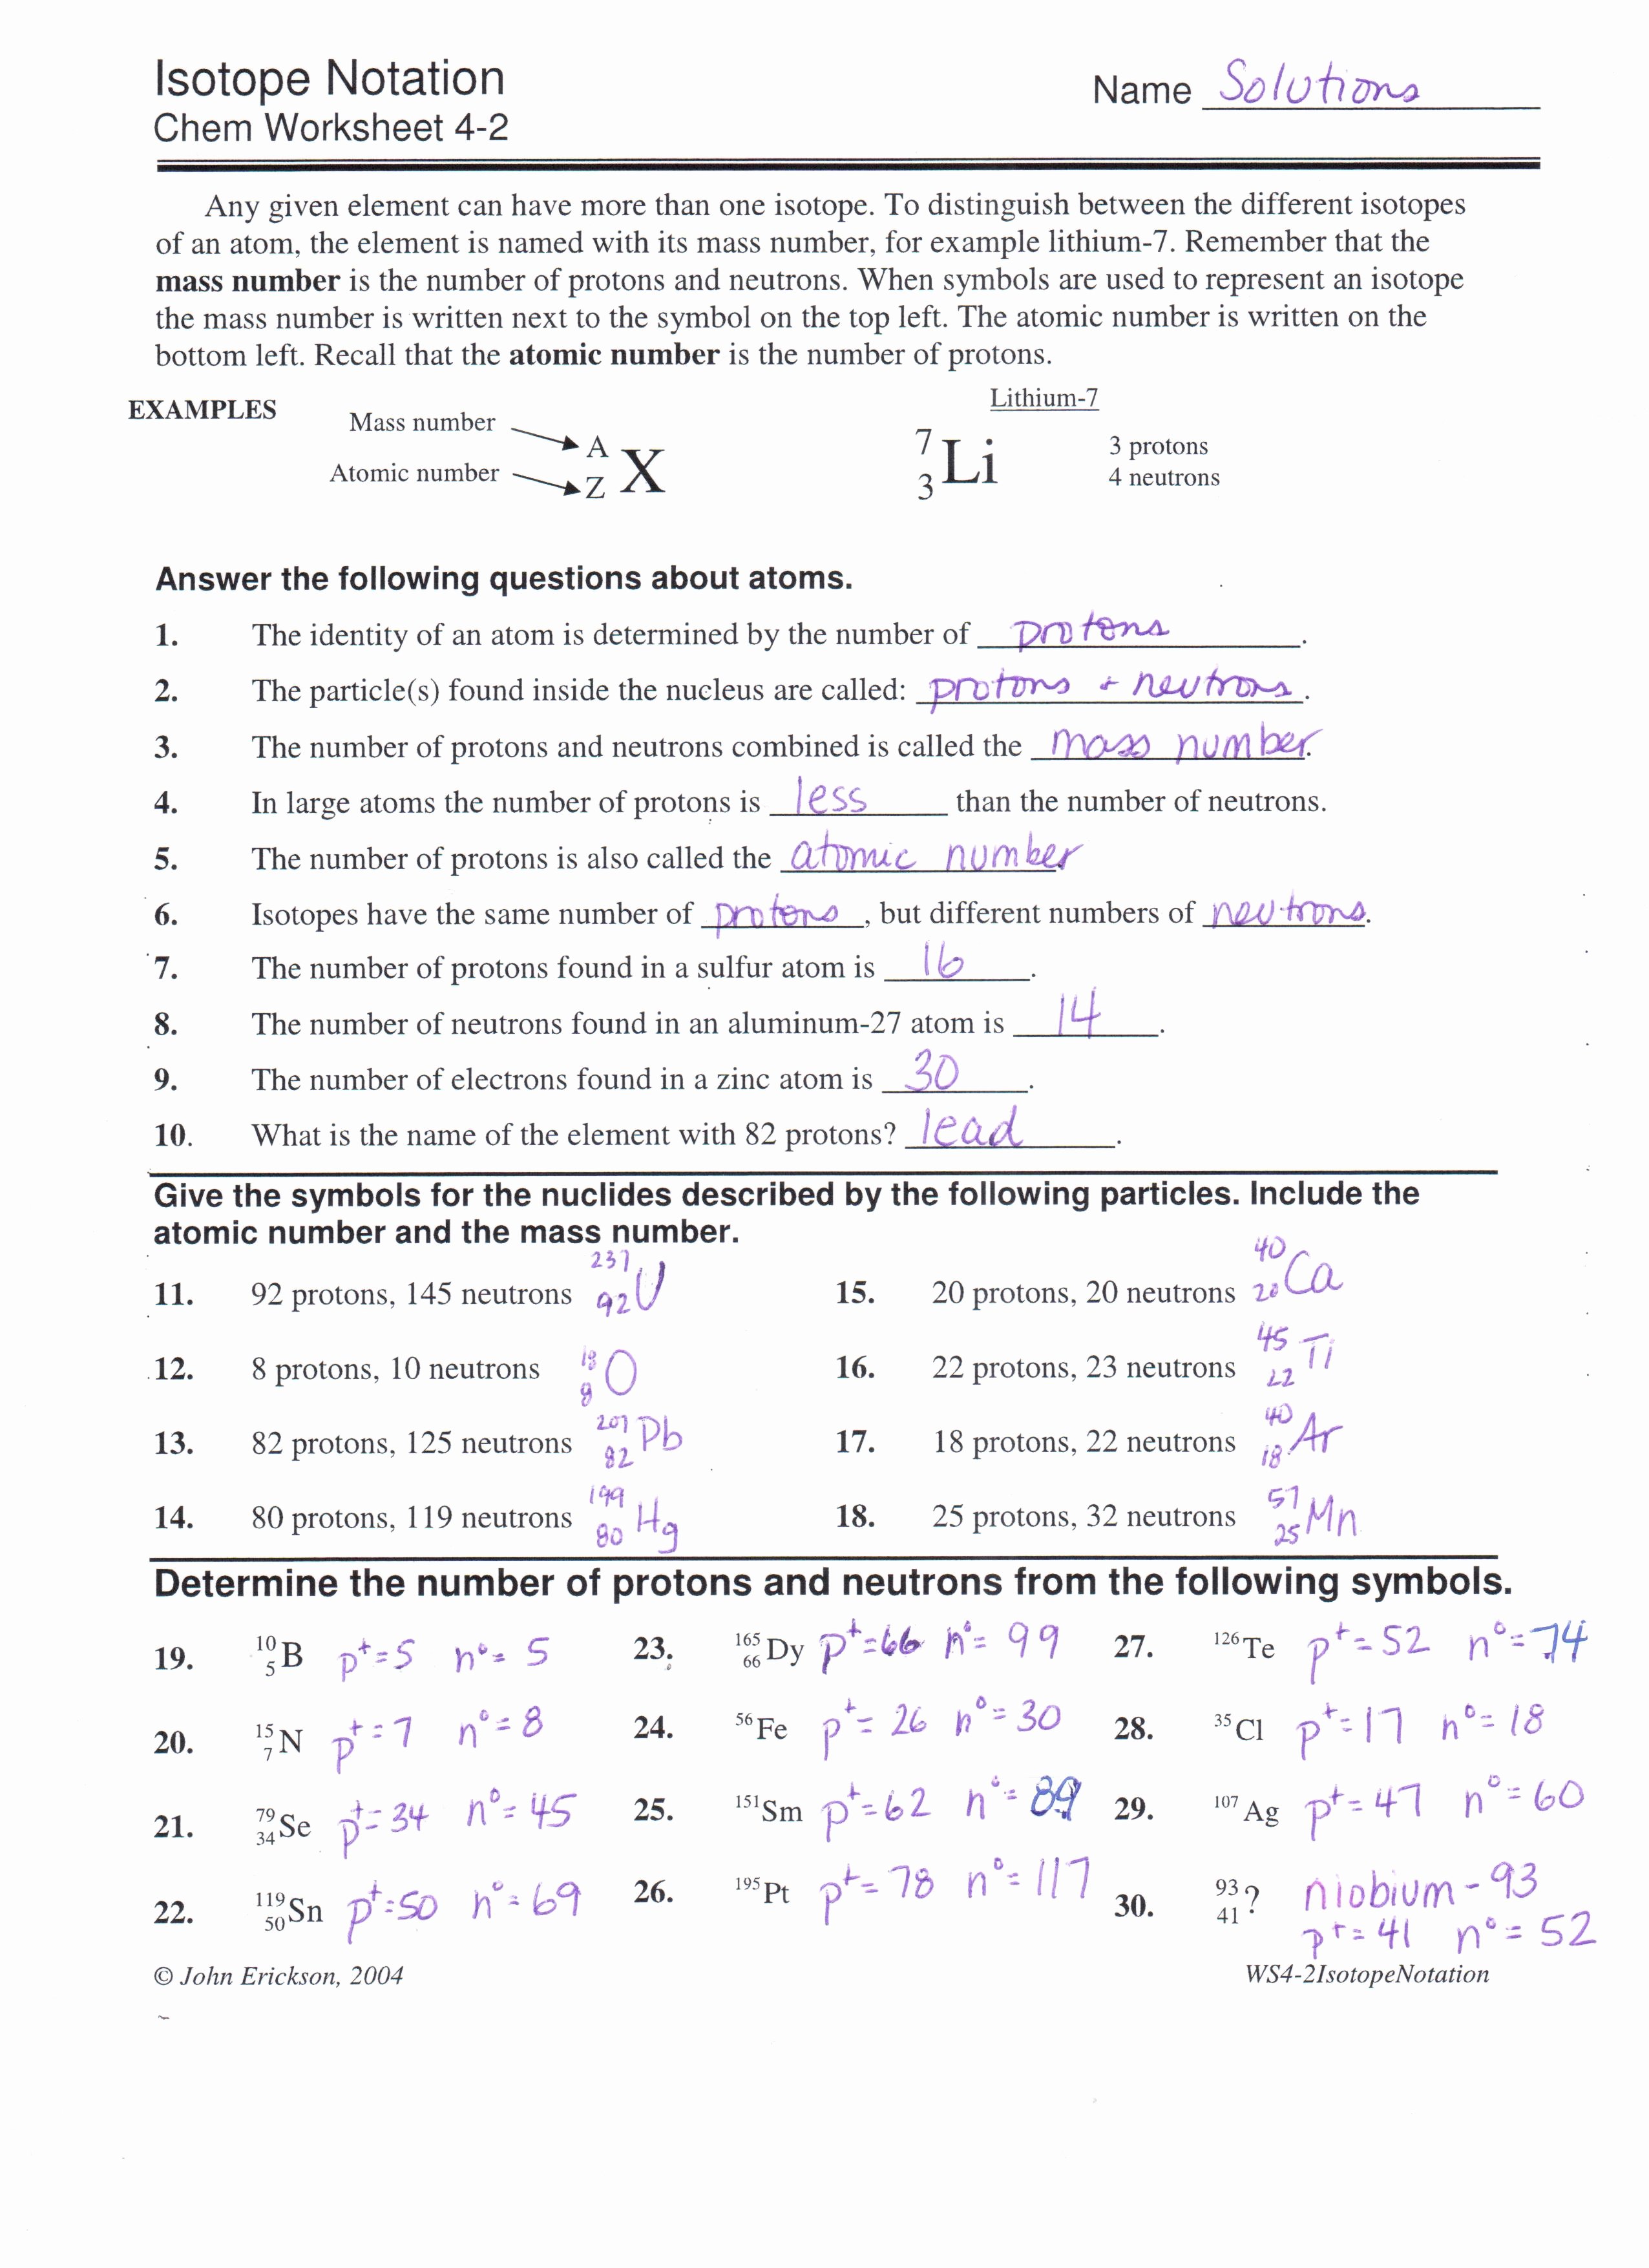 Isotopes Worksheet Answer Key Fresh Unit 2 Chapters 4 5 &amp; 6 Mrs Gingras Chemistry Page